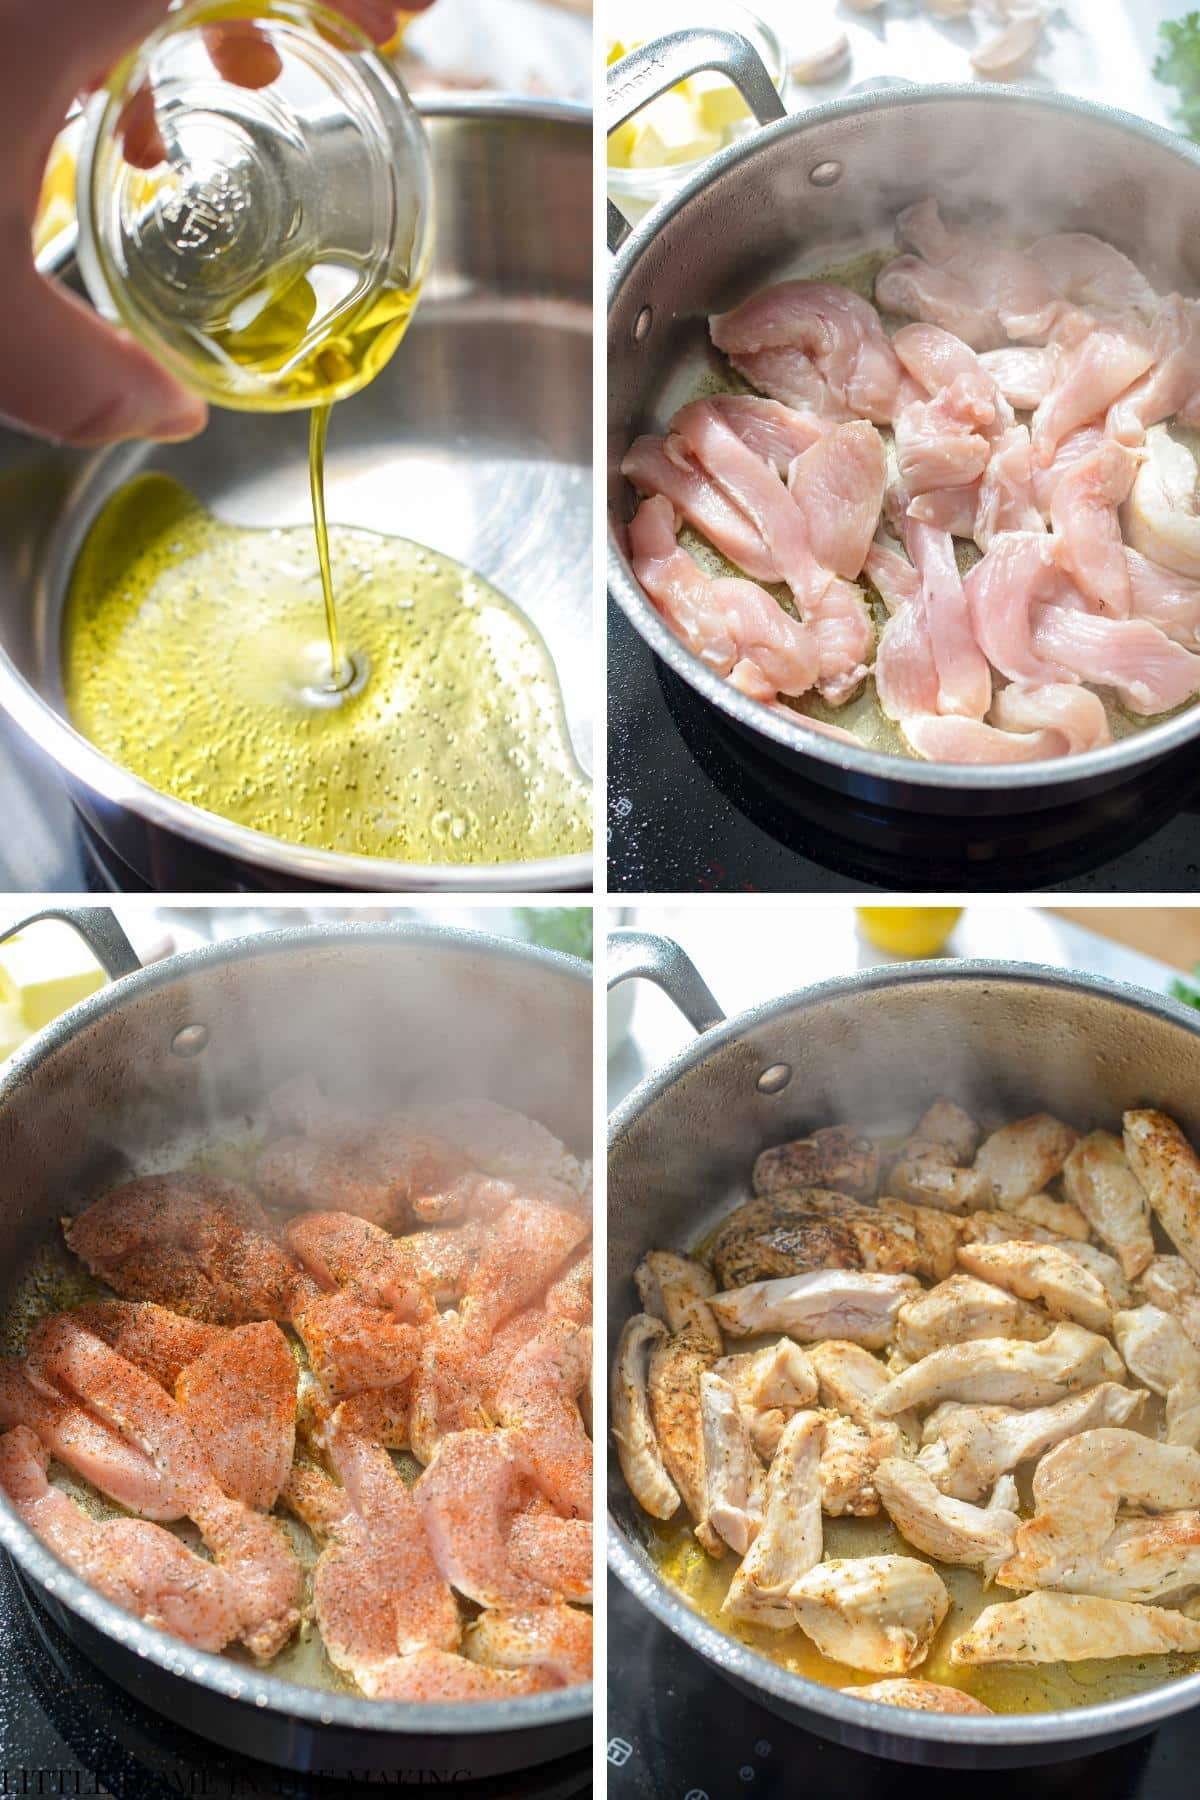 Cooking chicken pieces in oil with seasoning.